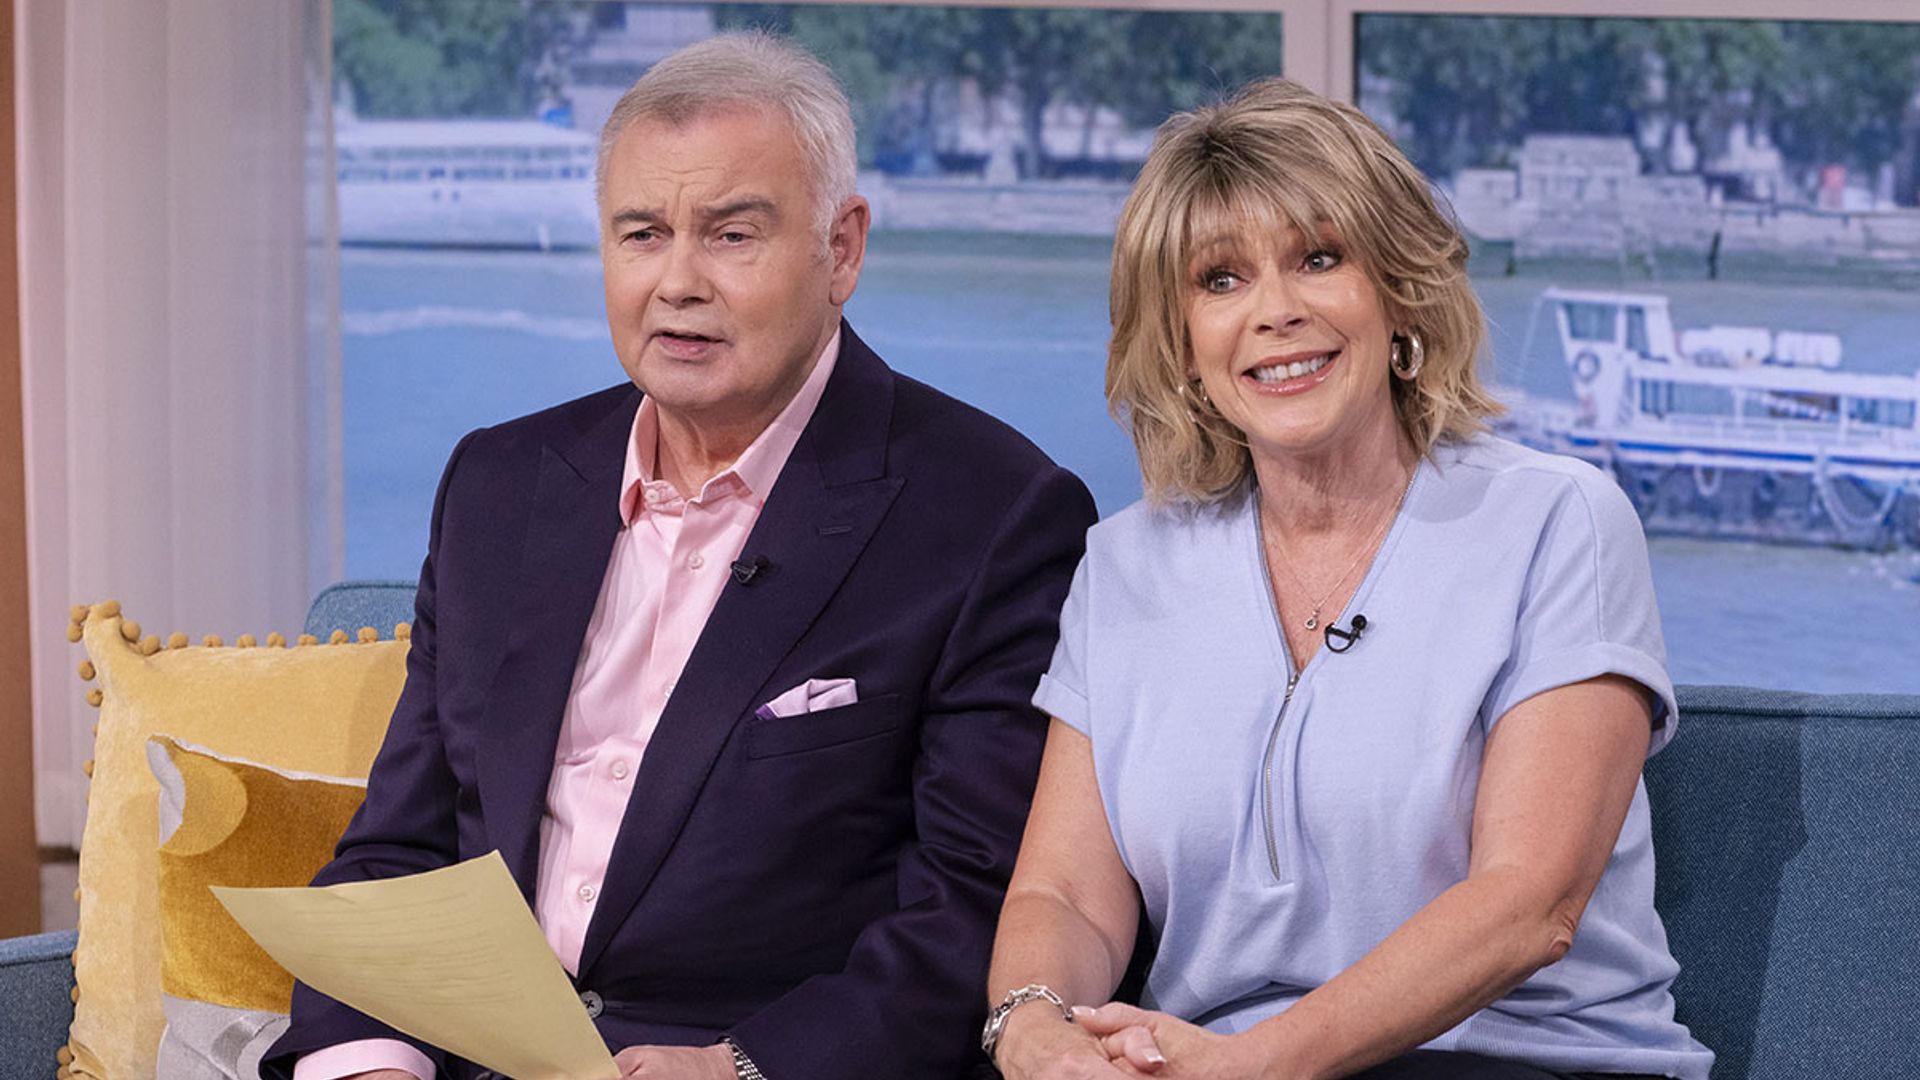 Ruth Langsford's future on This Morning revealed after Eamonn Holmes quits for GB News